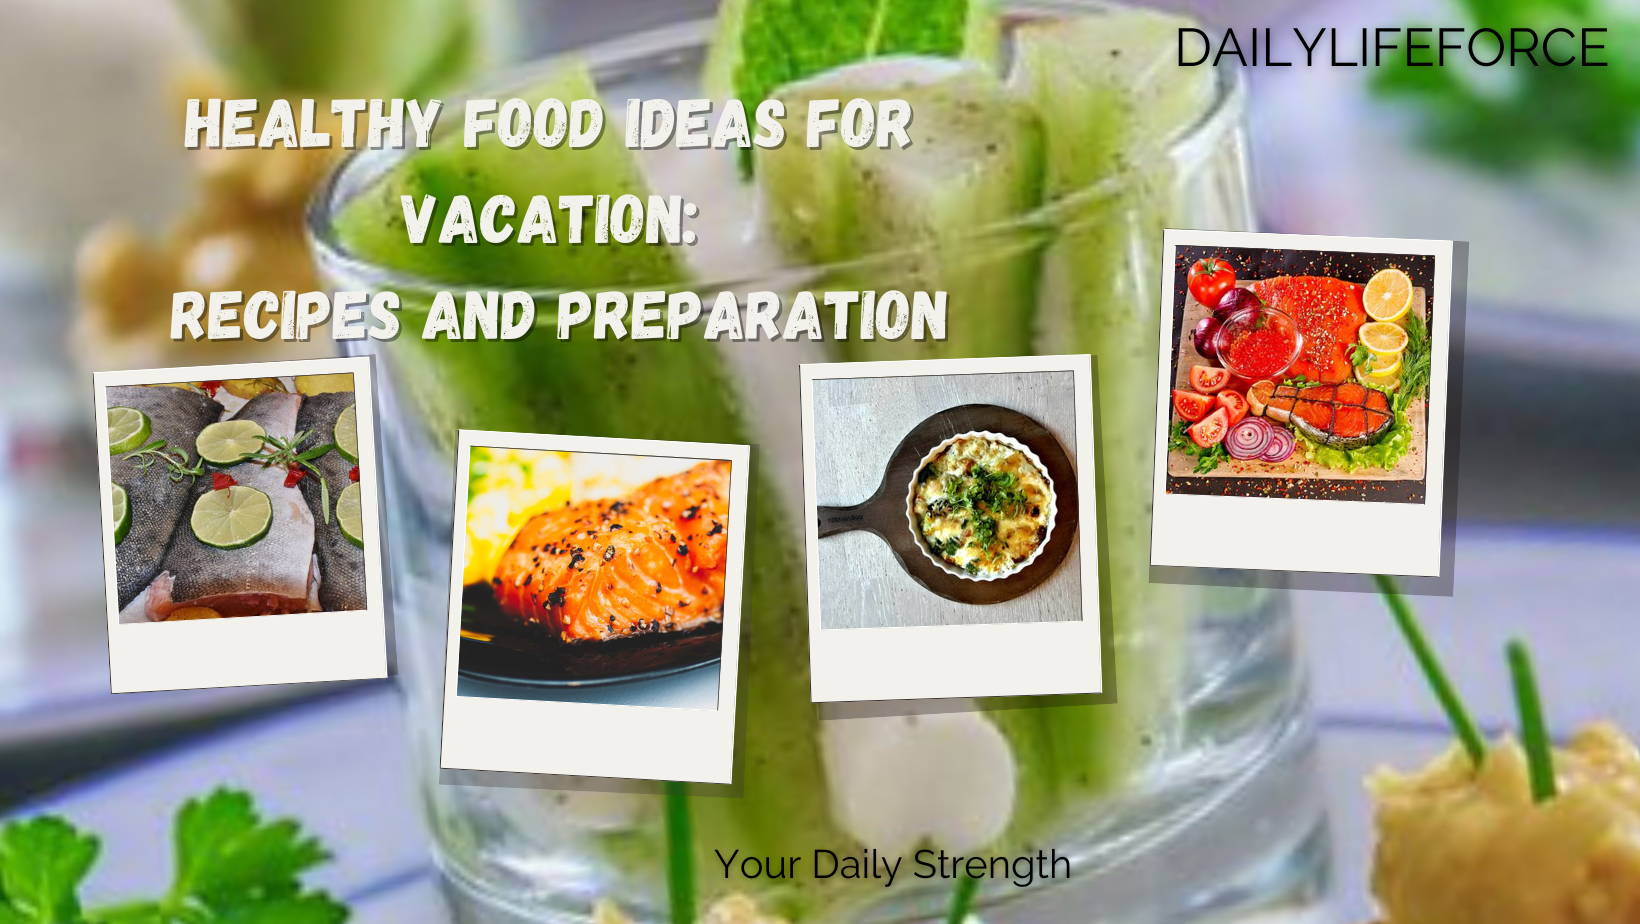 Healthy Food Ideas for Vacation: Recipes and Preparation